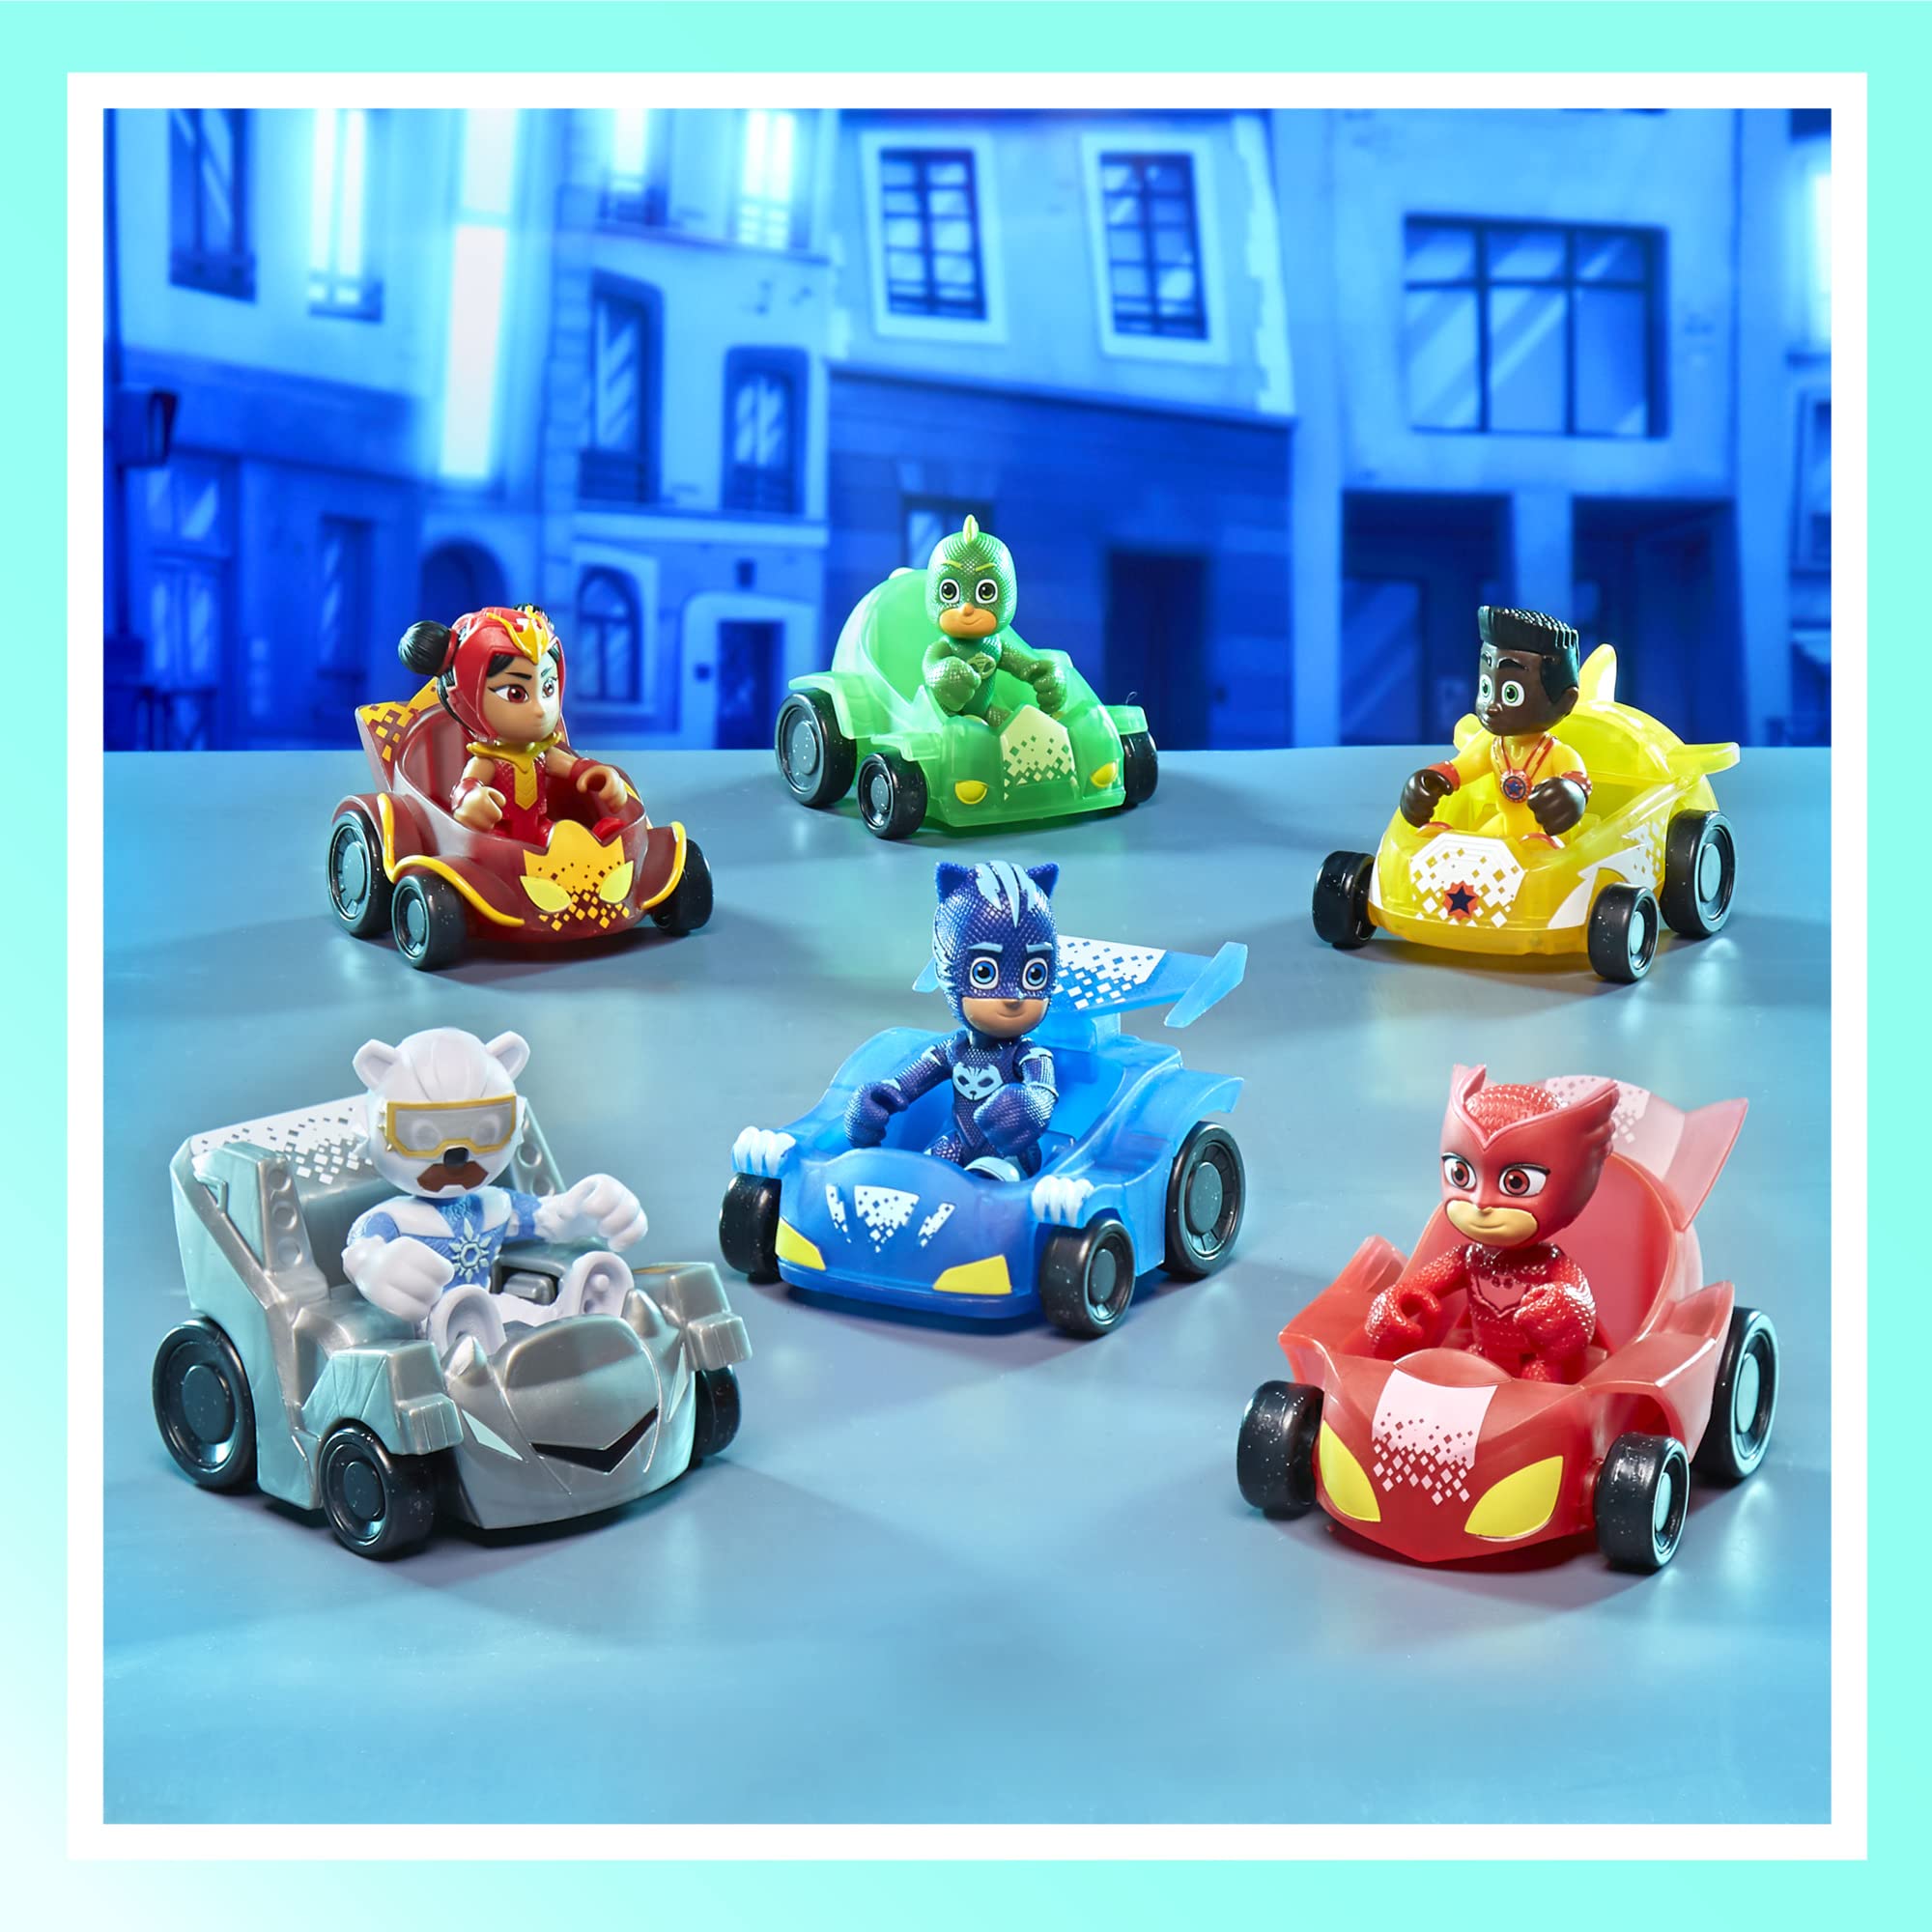 PJ Masks Power Heroes Racer Collection Preschool Toy with 6 Action Figures and 6 Vehicles for Kids 3 Years Up